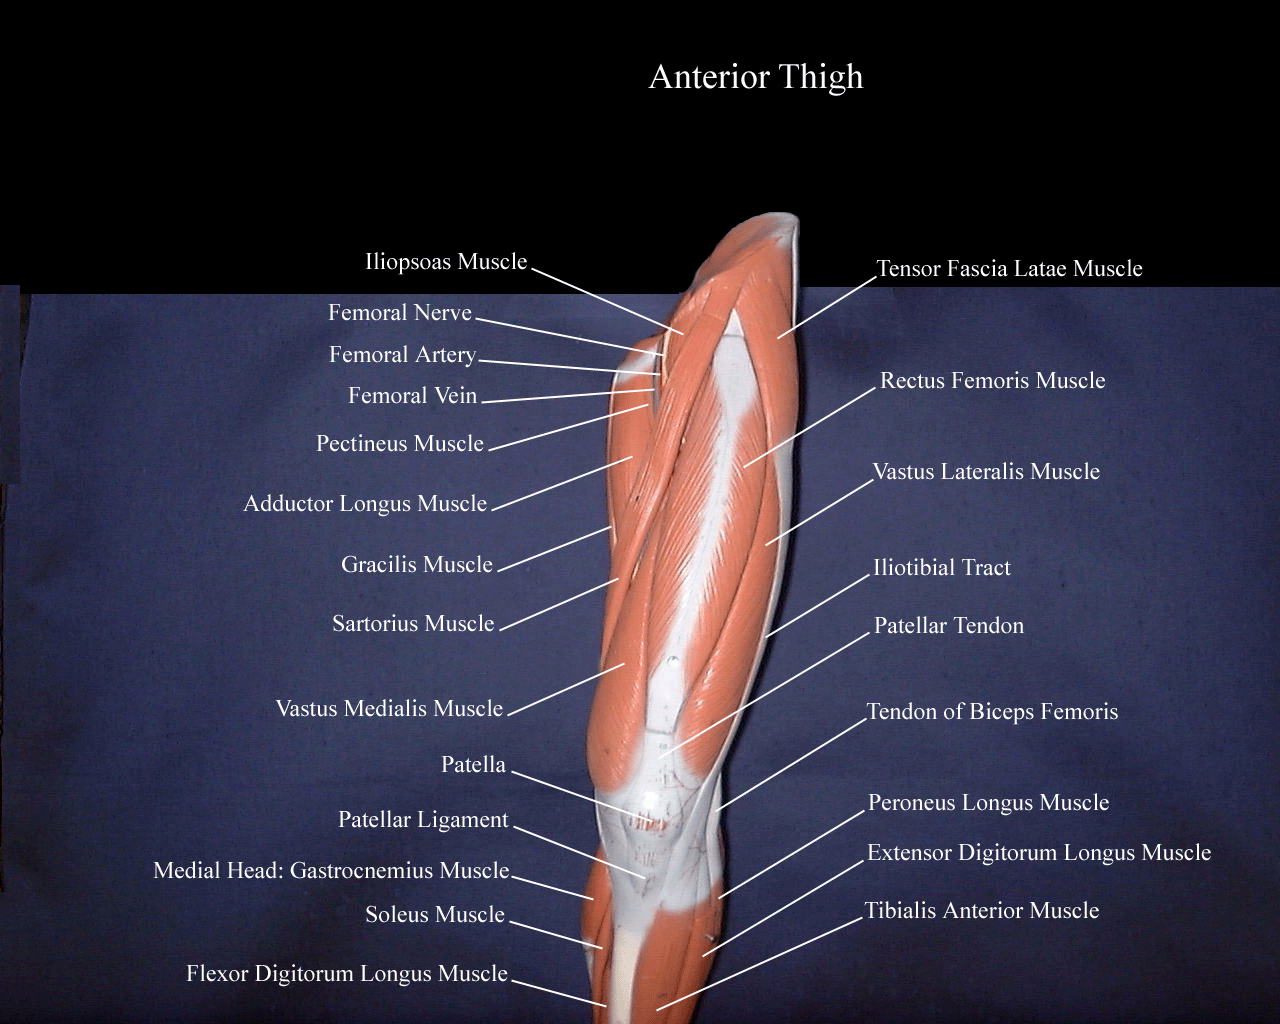 a labeled picture of a lower extremity model indicating the muscles in the superficial layer of the anterior thigh